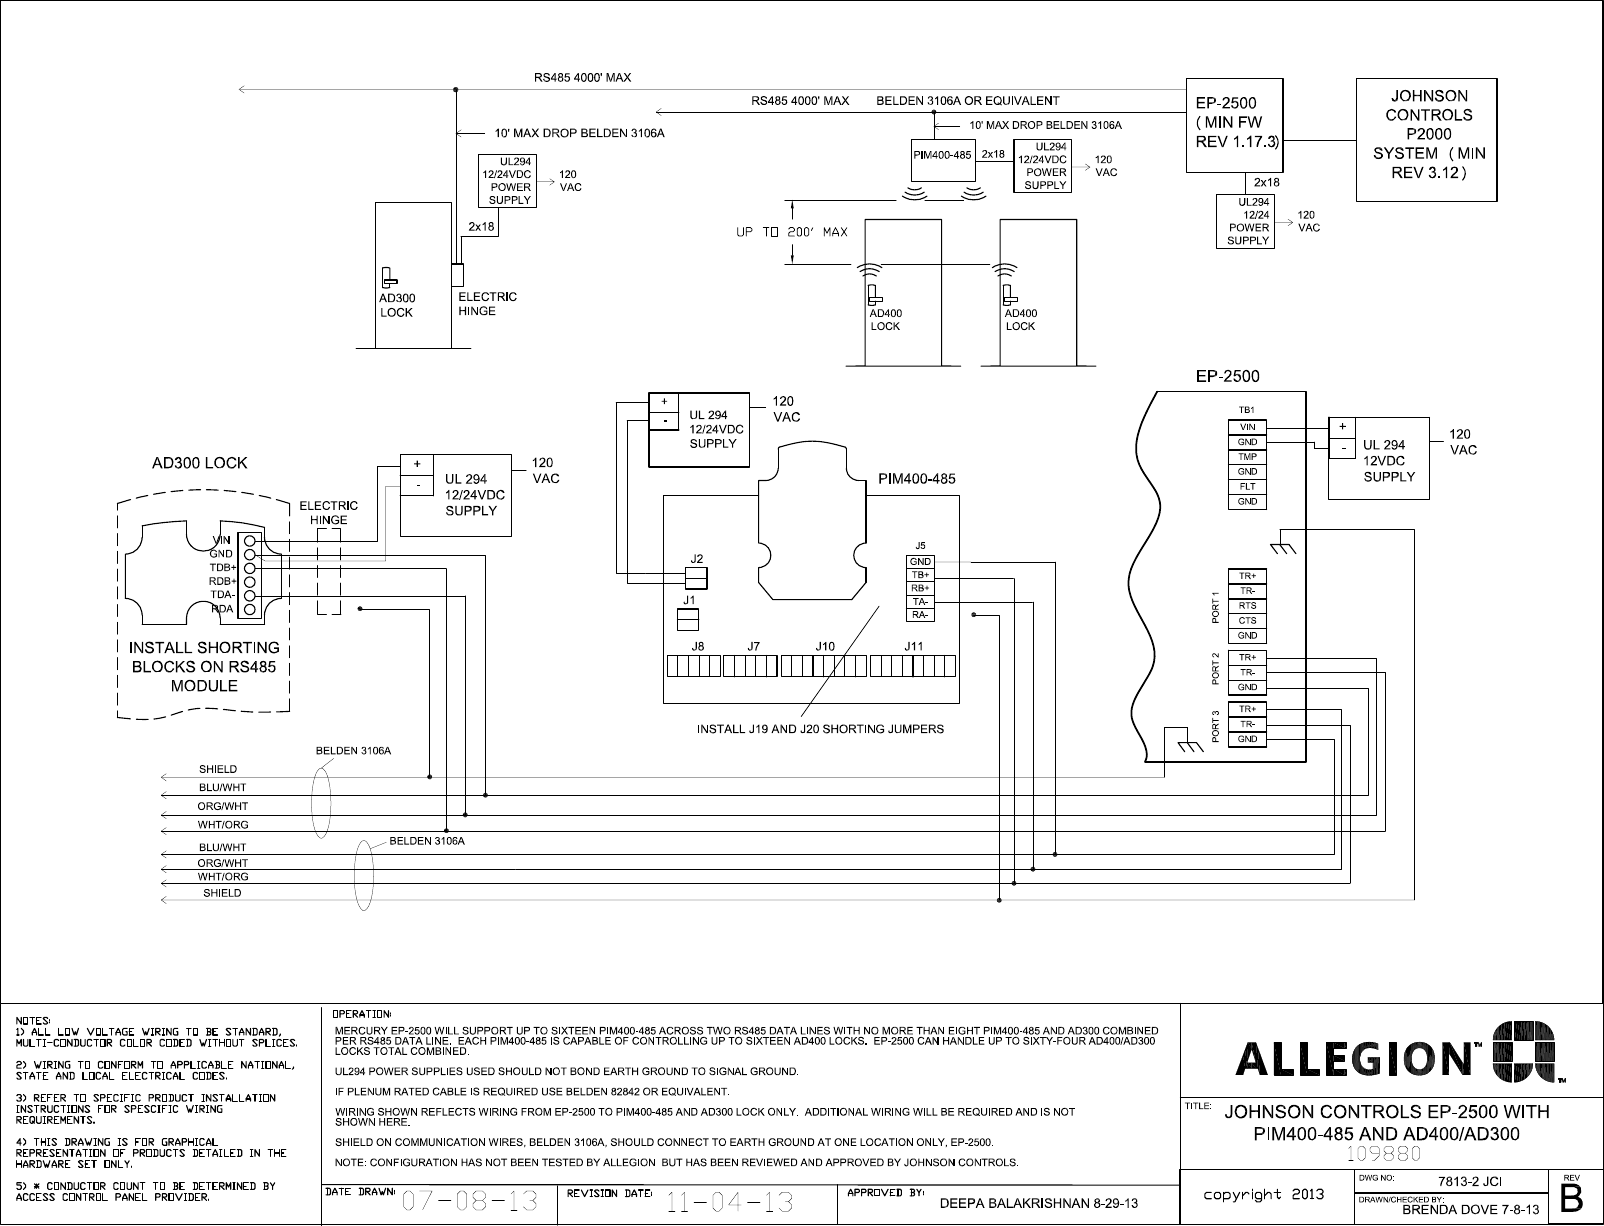 Page 1 of 1 - Schlage Electronics C AD300 AD400 Wiring Diagram Johnson Controls EP-2500 RS485 109880